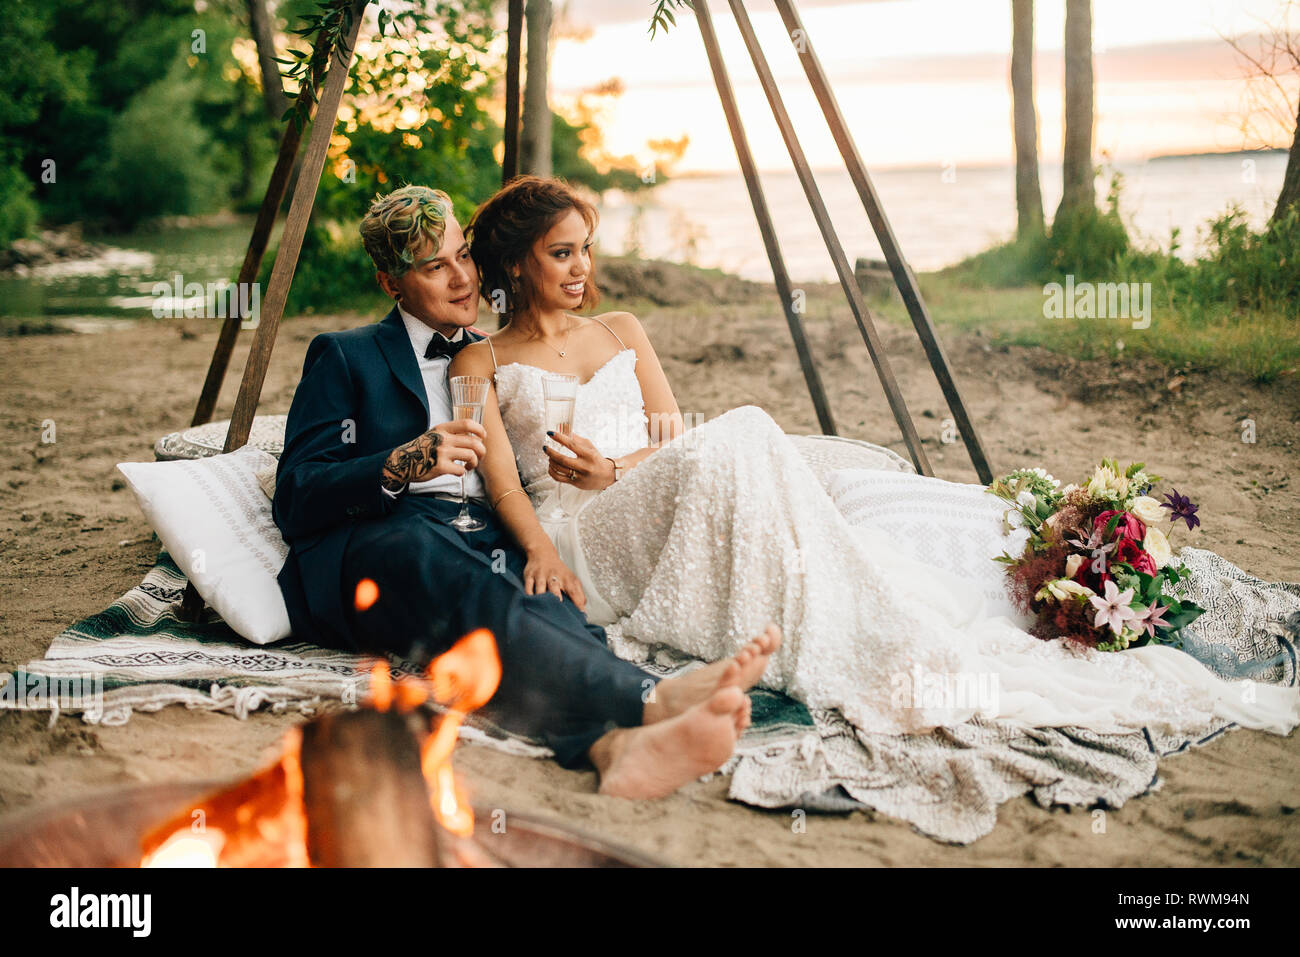 Bride and groom on picnic blanket by lakeside campfire, Lake Ontario, Toronto, Canada Stock Photo